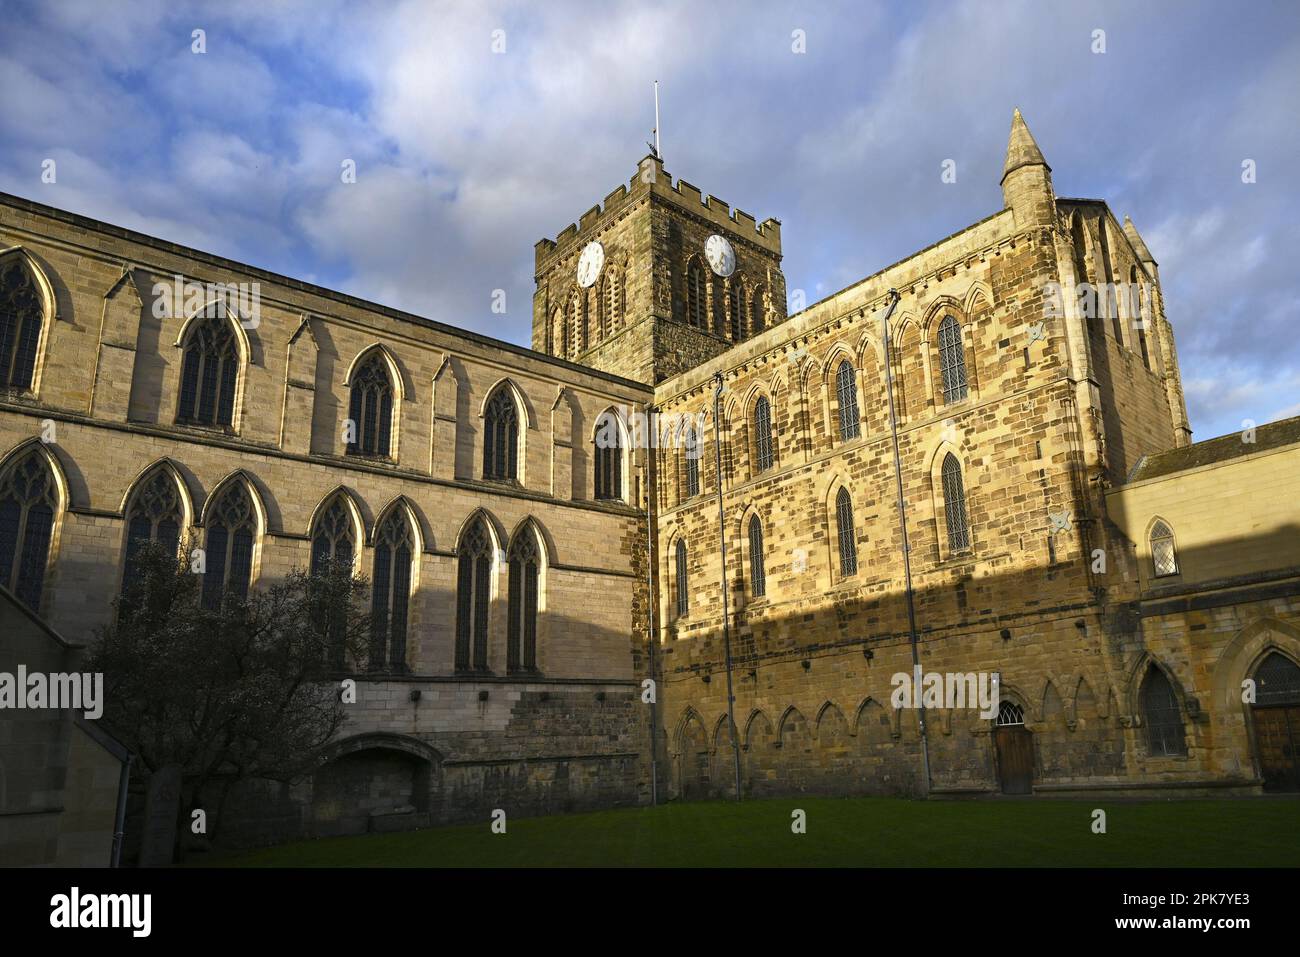 Hexham, Northumberland, England, UK. Hexham Abbey (Church of the Augustinian Priory of St Andrew - c1170-1250 - Norman) Stock Photo